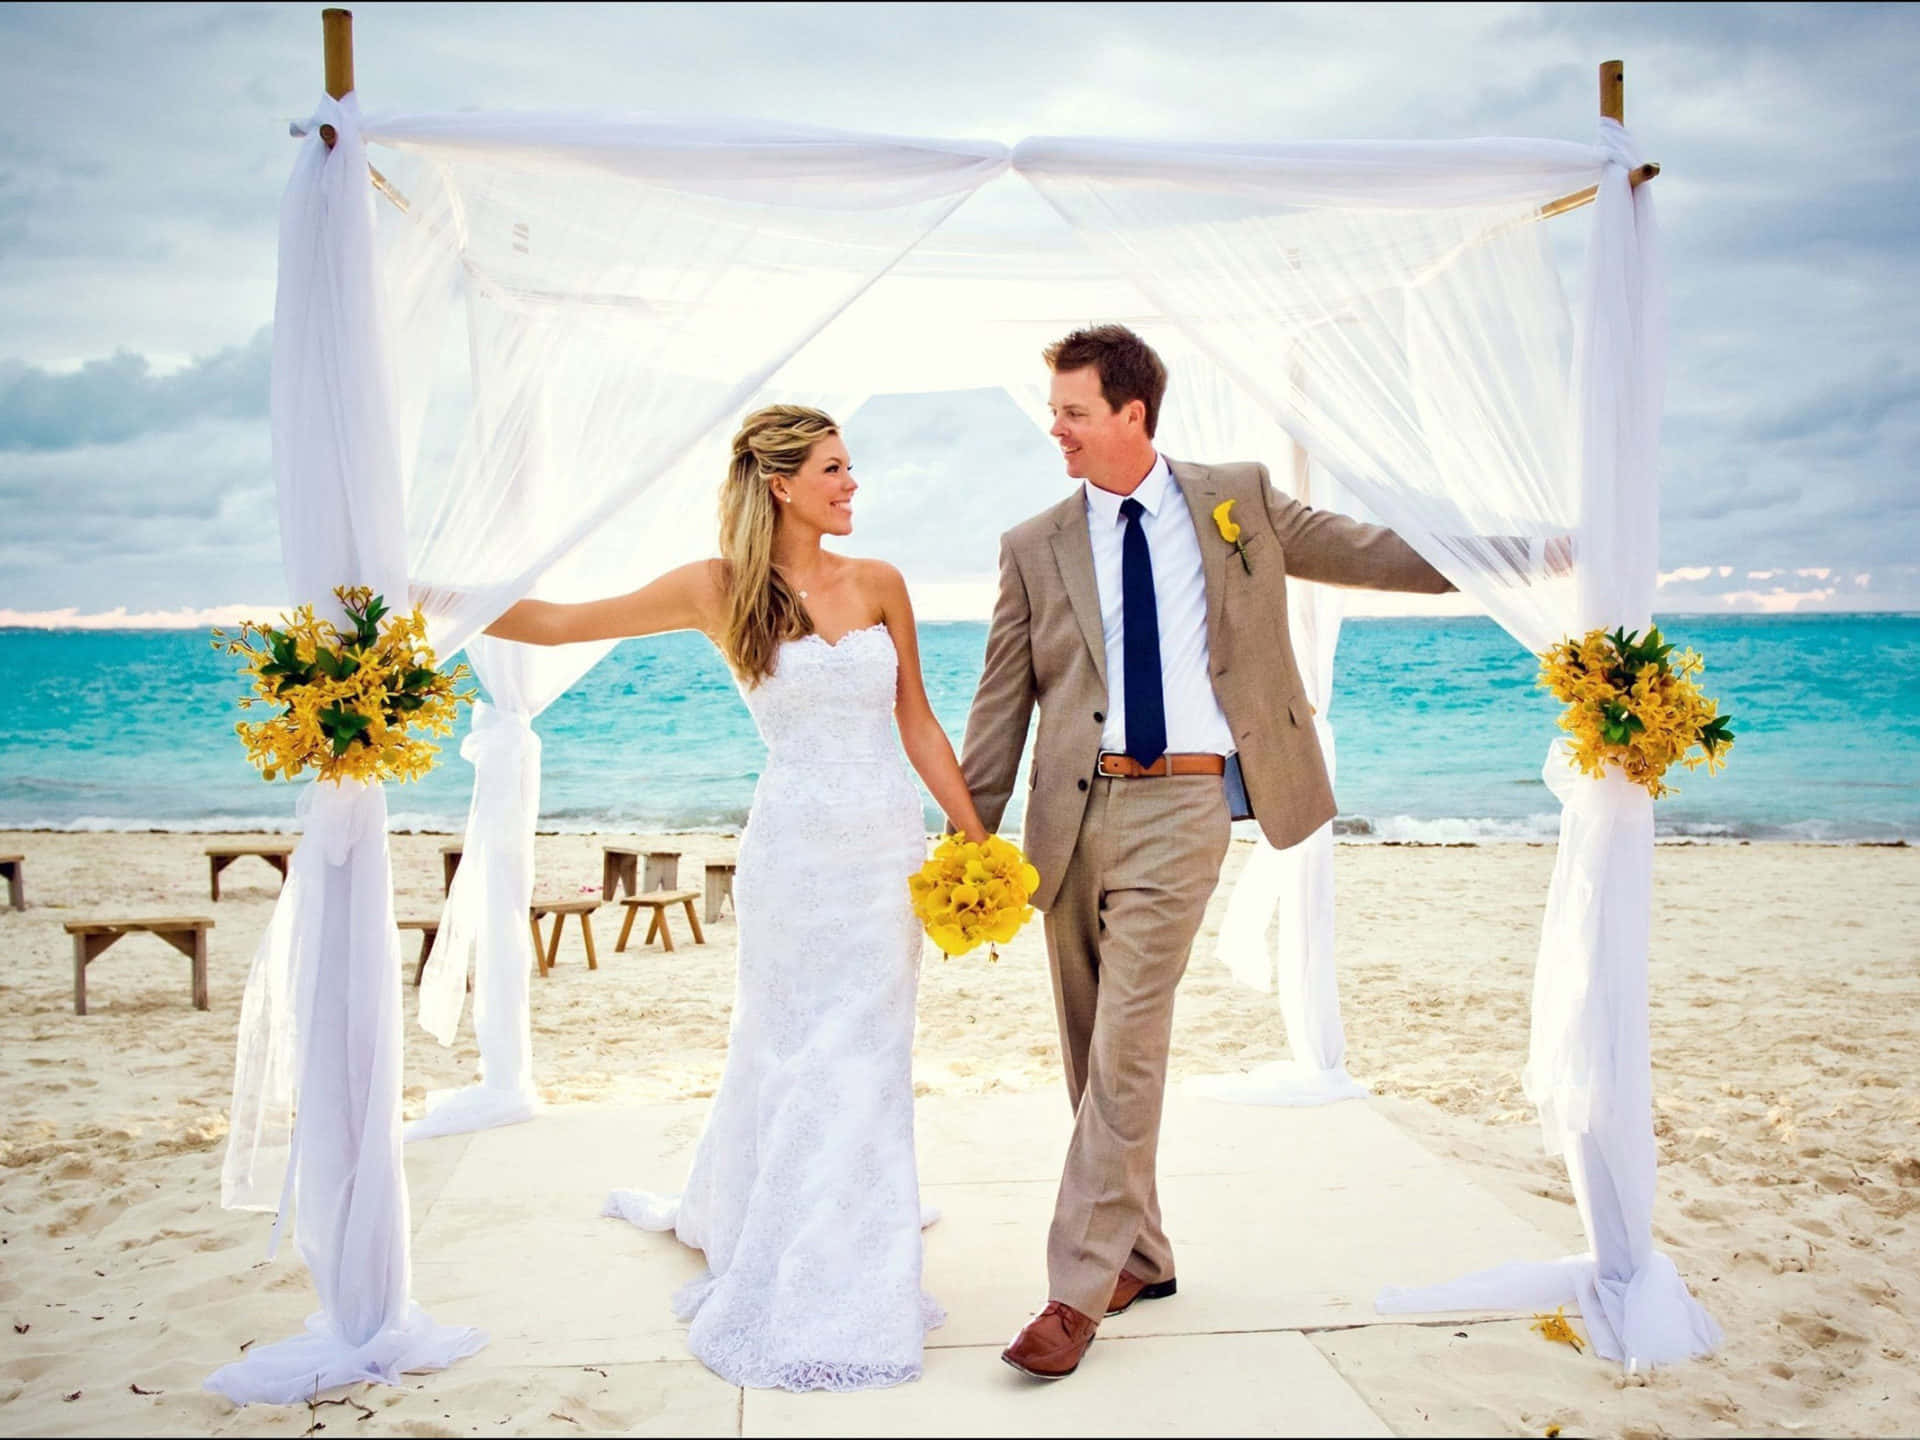 A Perfect Moment Captured - Newlywed Couple At A Beautiful Beach Wedding Wallpaper